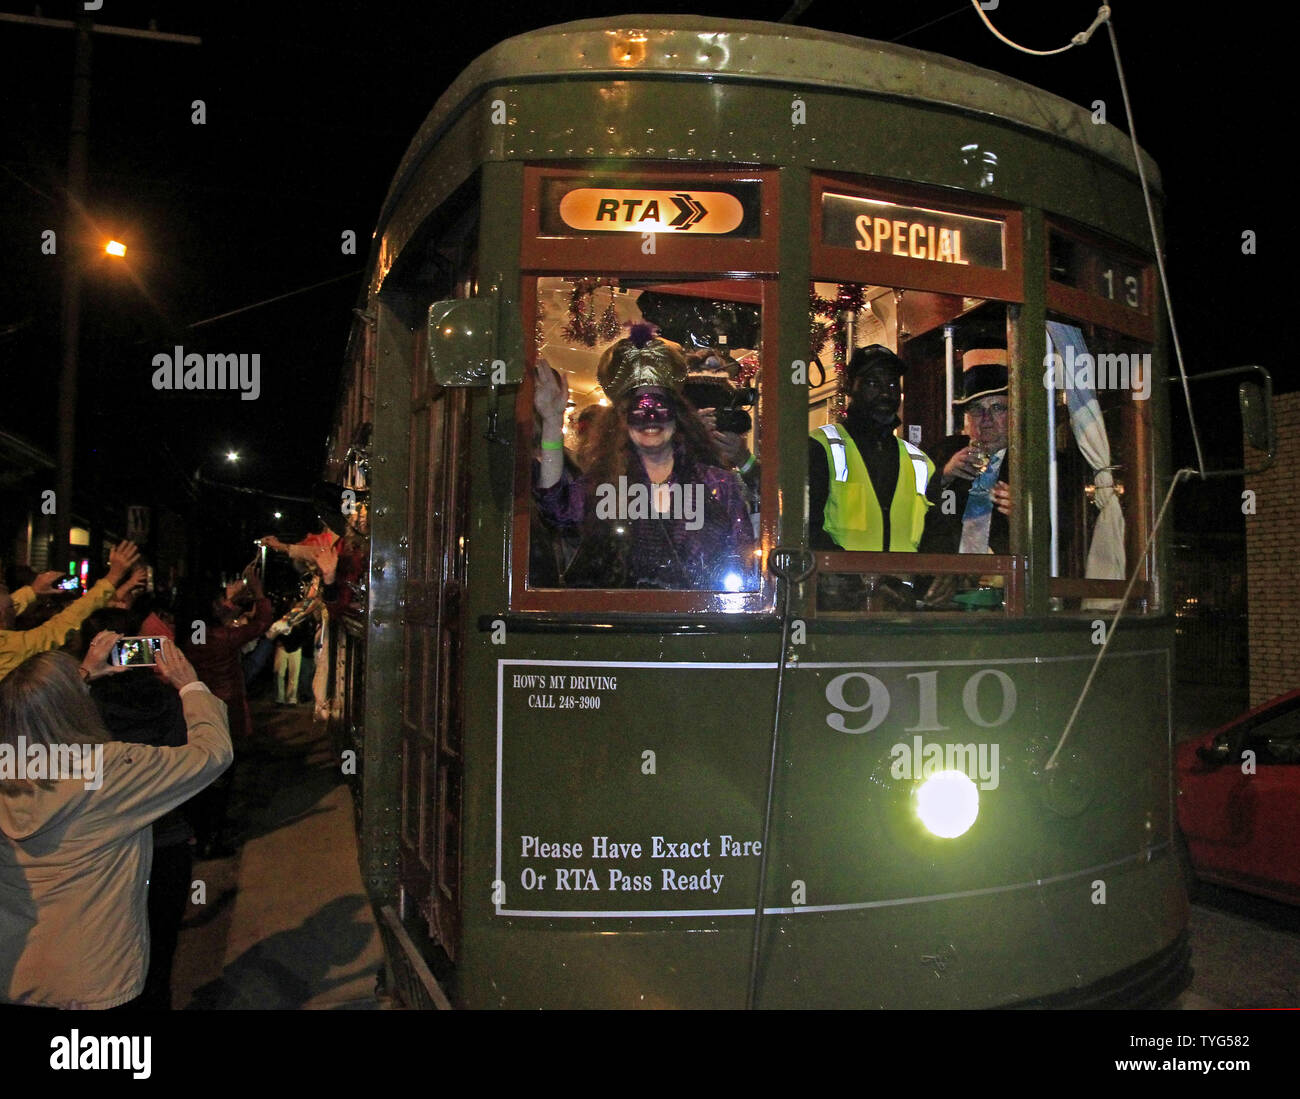 Member of the Phunny Phorty Phellows, 'The Heralds of Carnival,' celebrates the start of the 2016 Carnival season in New Orleans with a streetcar ride down St. Charles Avenue on Twelfth Night, January 6, 2016.The Mardi Gras organization is known for its satirical parade, and members' costumes often reflect topical themes.  Photo by AJ Sisco/UPI Stock Photo